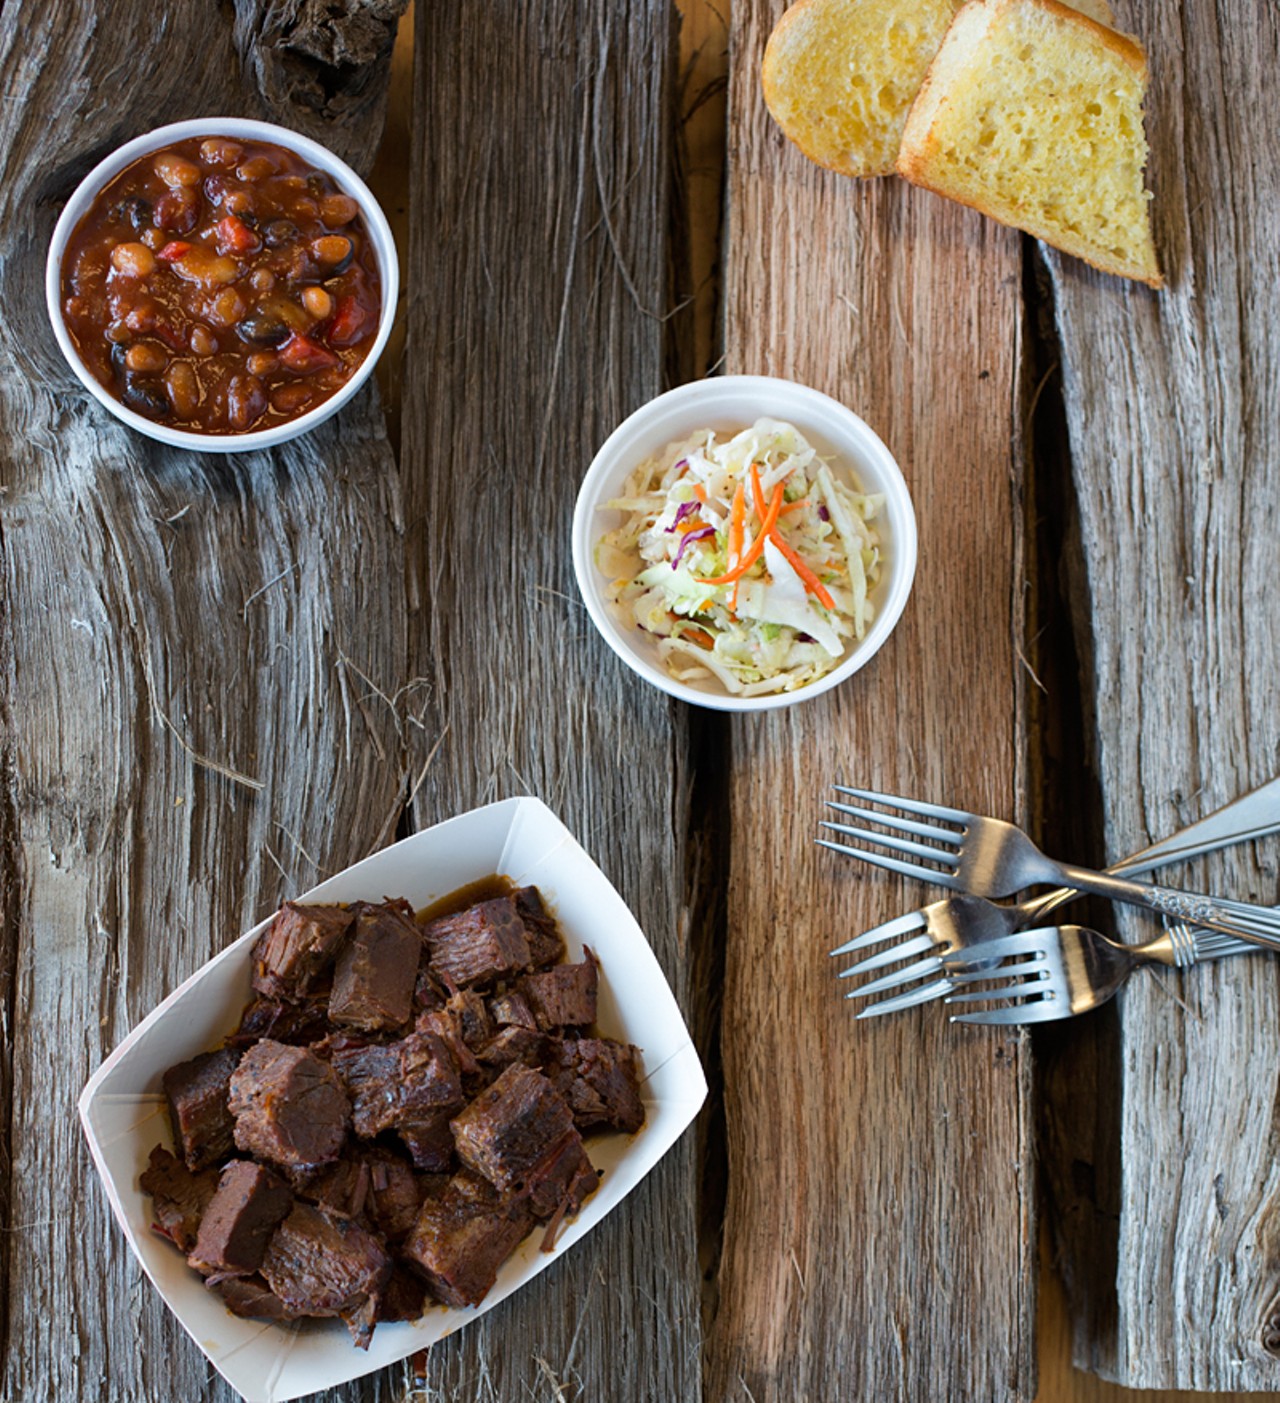 "Burnt Ends," served with garlic bread and a choice of two sides. Here, they are crispy cole slaw and baked beans, made with sweet peppers and pulled pork.